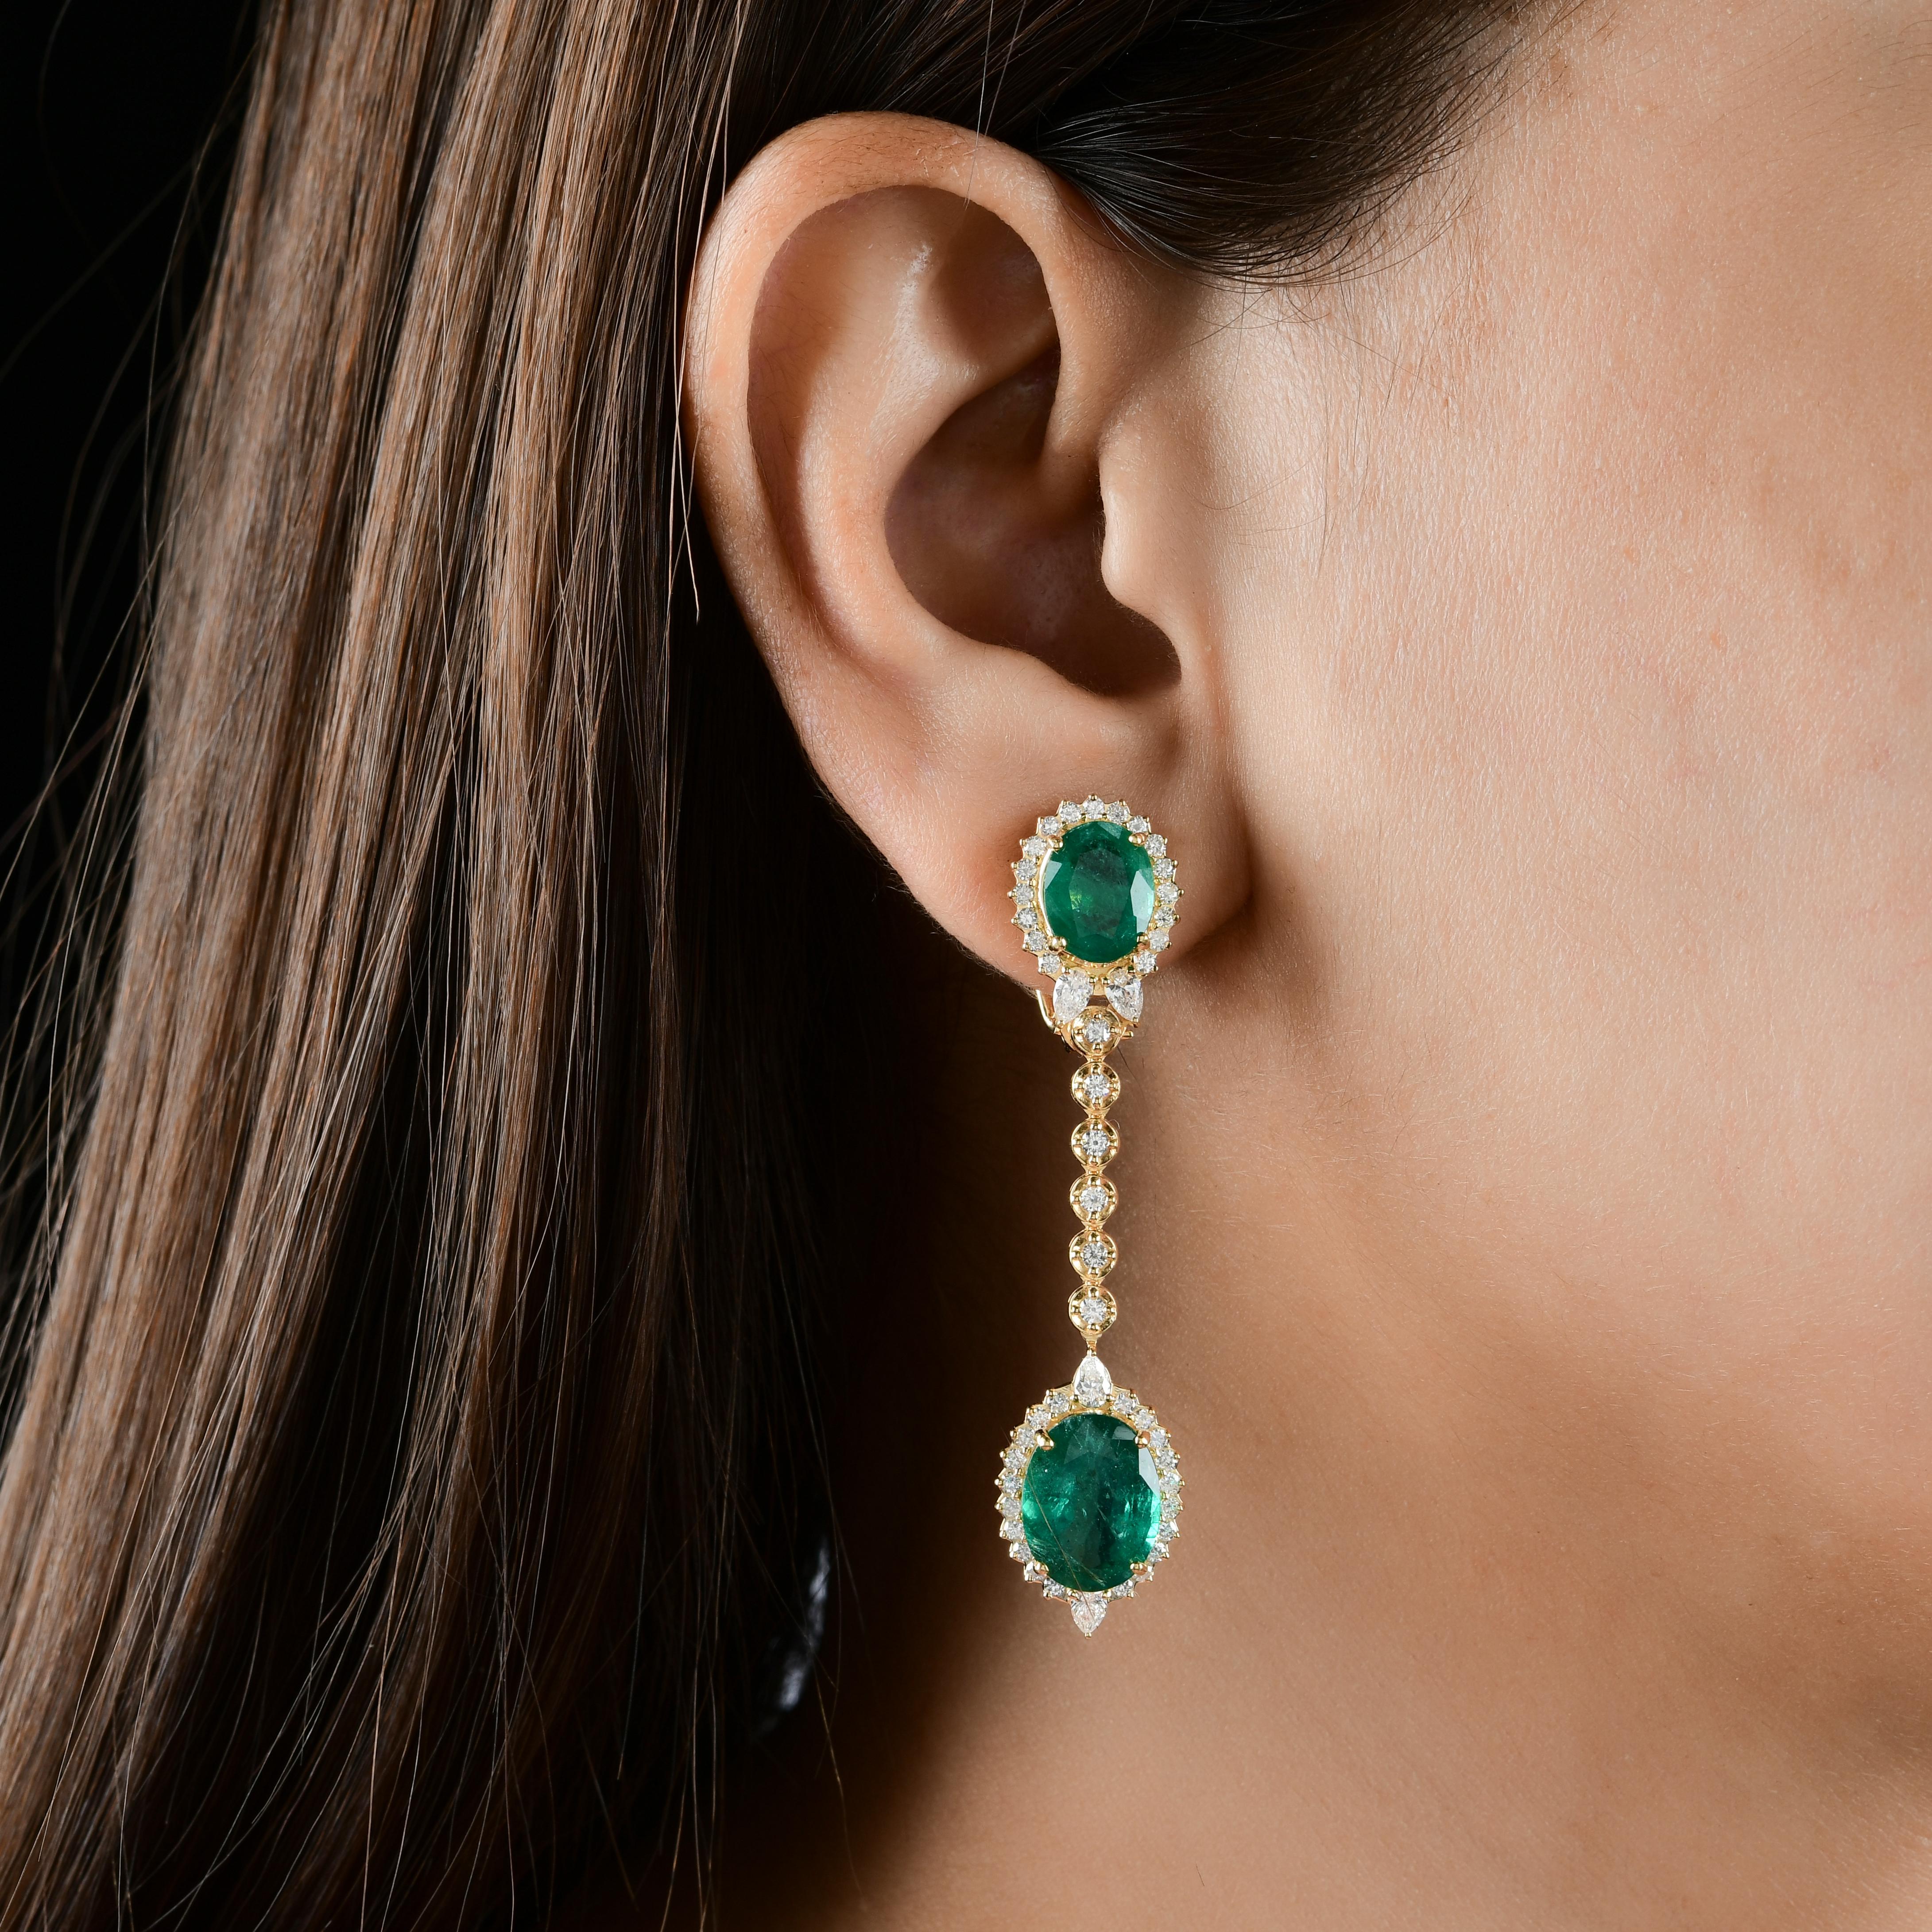 Surrounding the emeralds are sparkling diamonds, adding a touch of glamour and brilliance to the design. These diamonds are of the highest quality, meticulously set to maximize their fire and brilliance, creating a dazzling halo that accentuates the